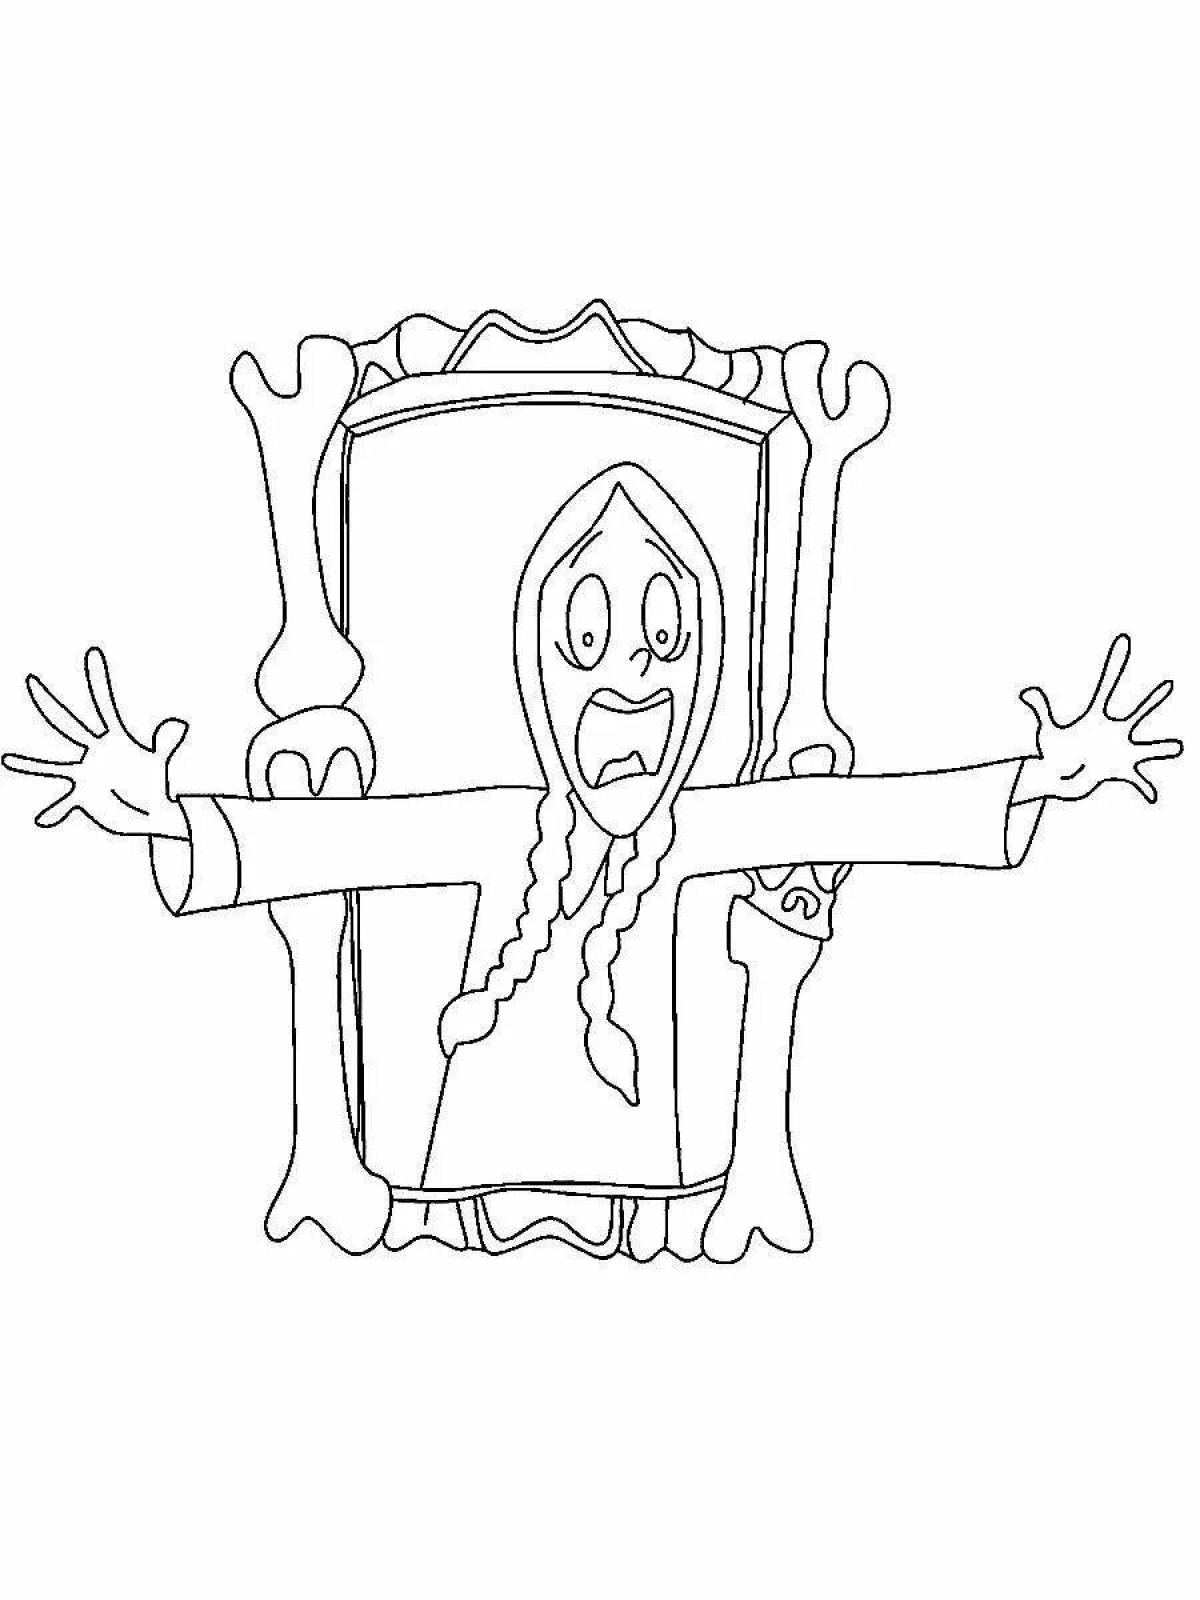 Creative addams family coloring pages for kids